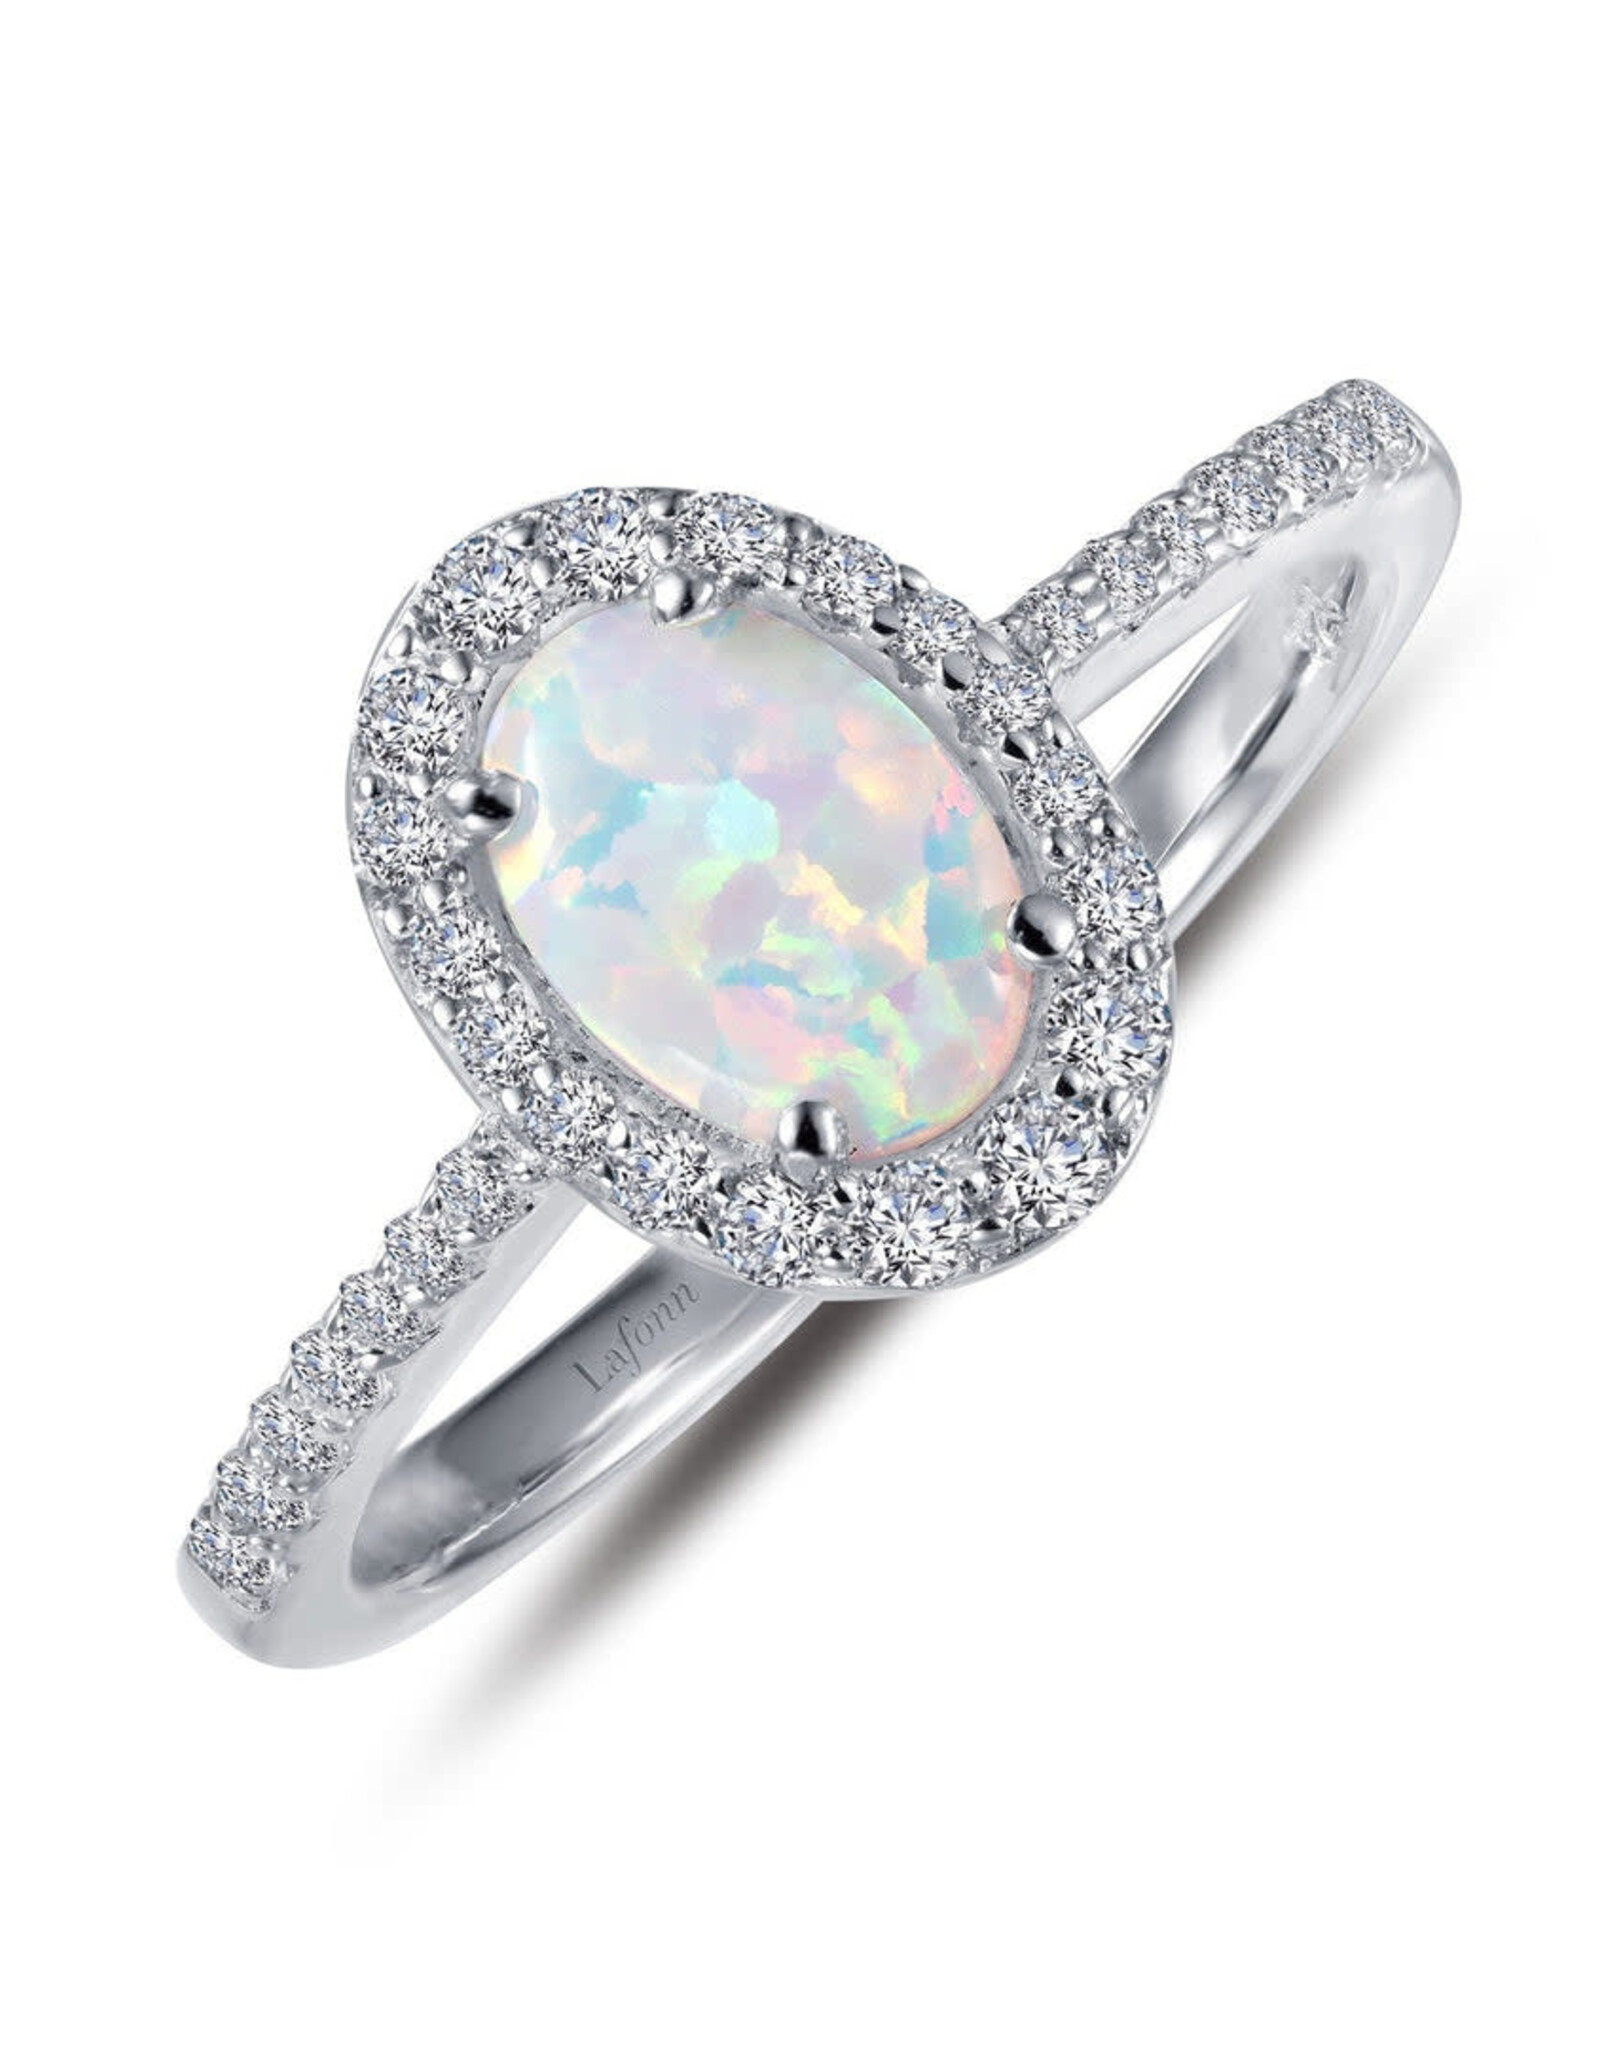 R0296OPP07 - 1.92 CTTW Oval Opal Halo Ring - size 7